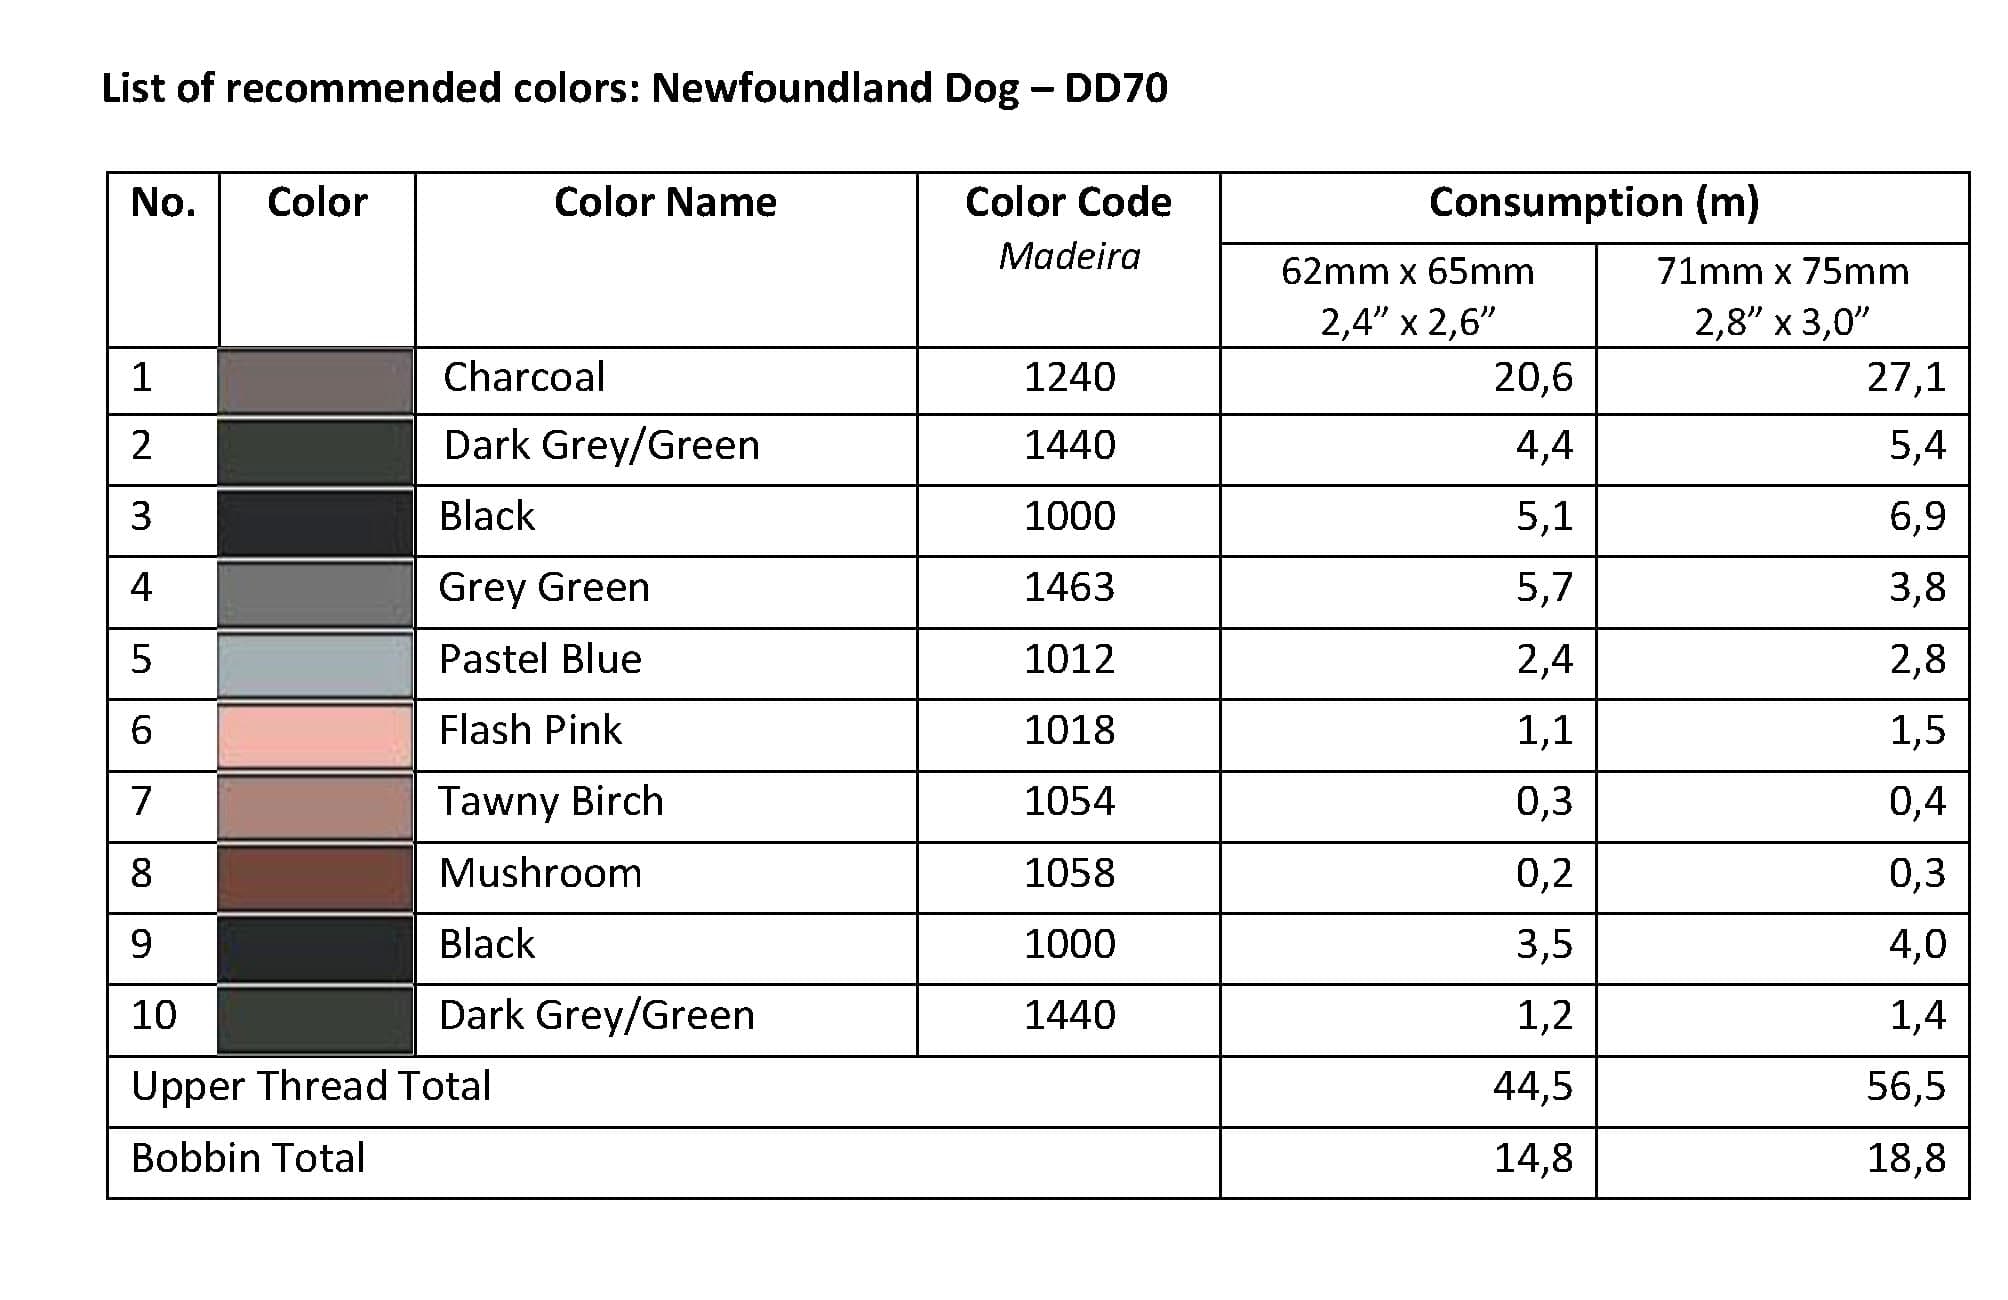 List of Recommended Colors - Newfoundland DD70